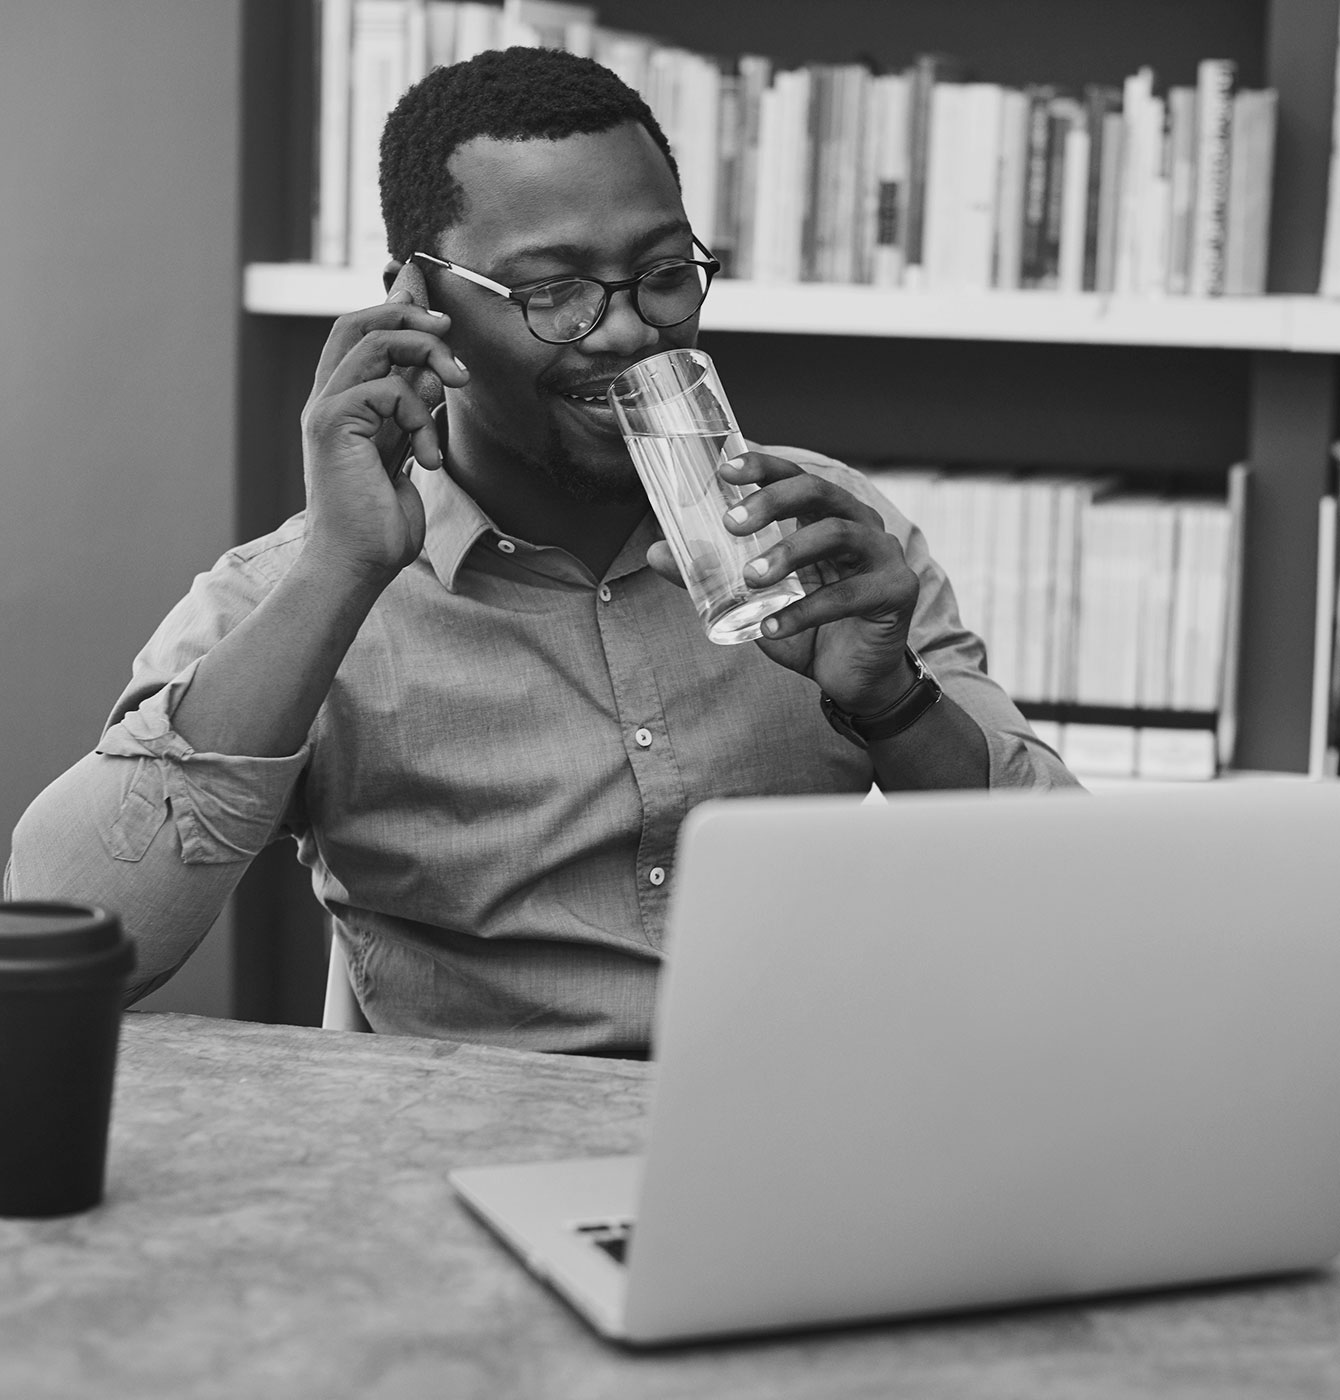 Photograph of a man talking on the phone while drinking from a glass of water